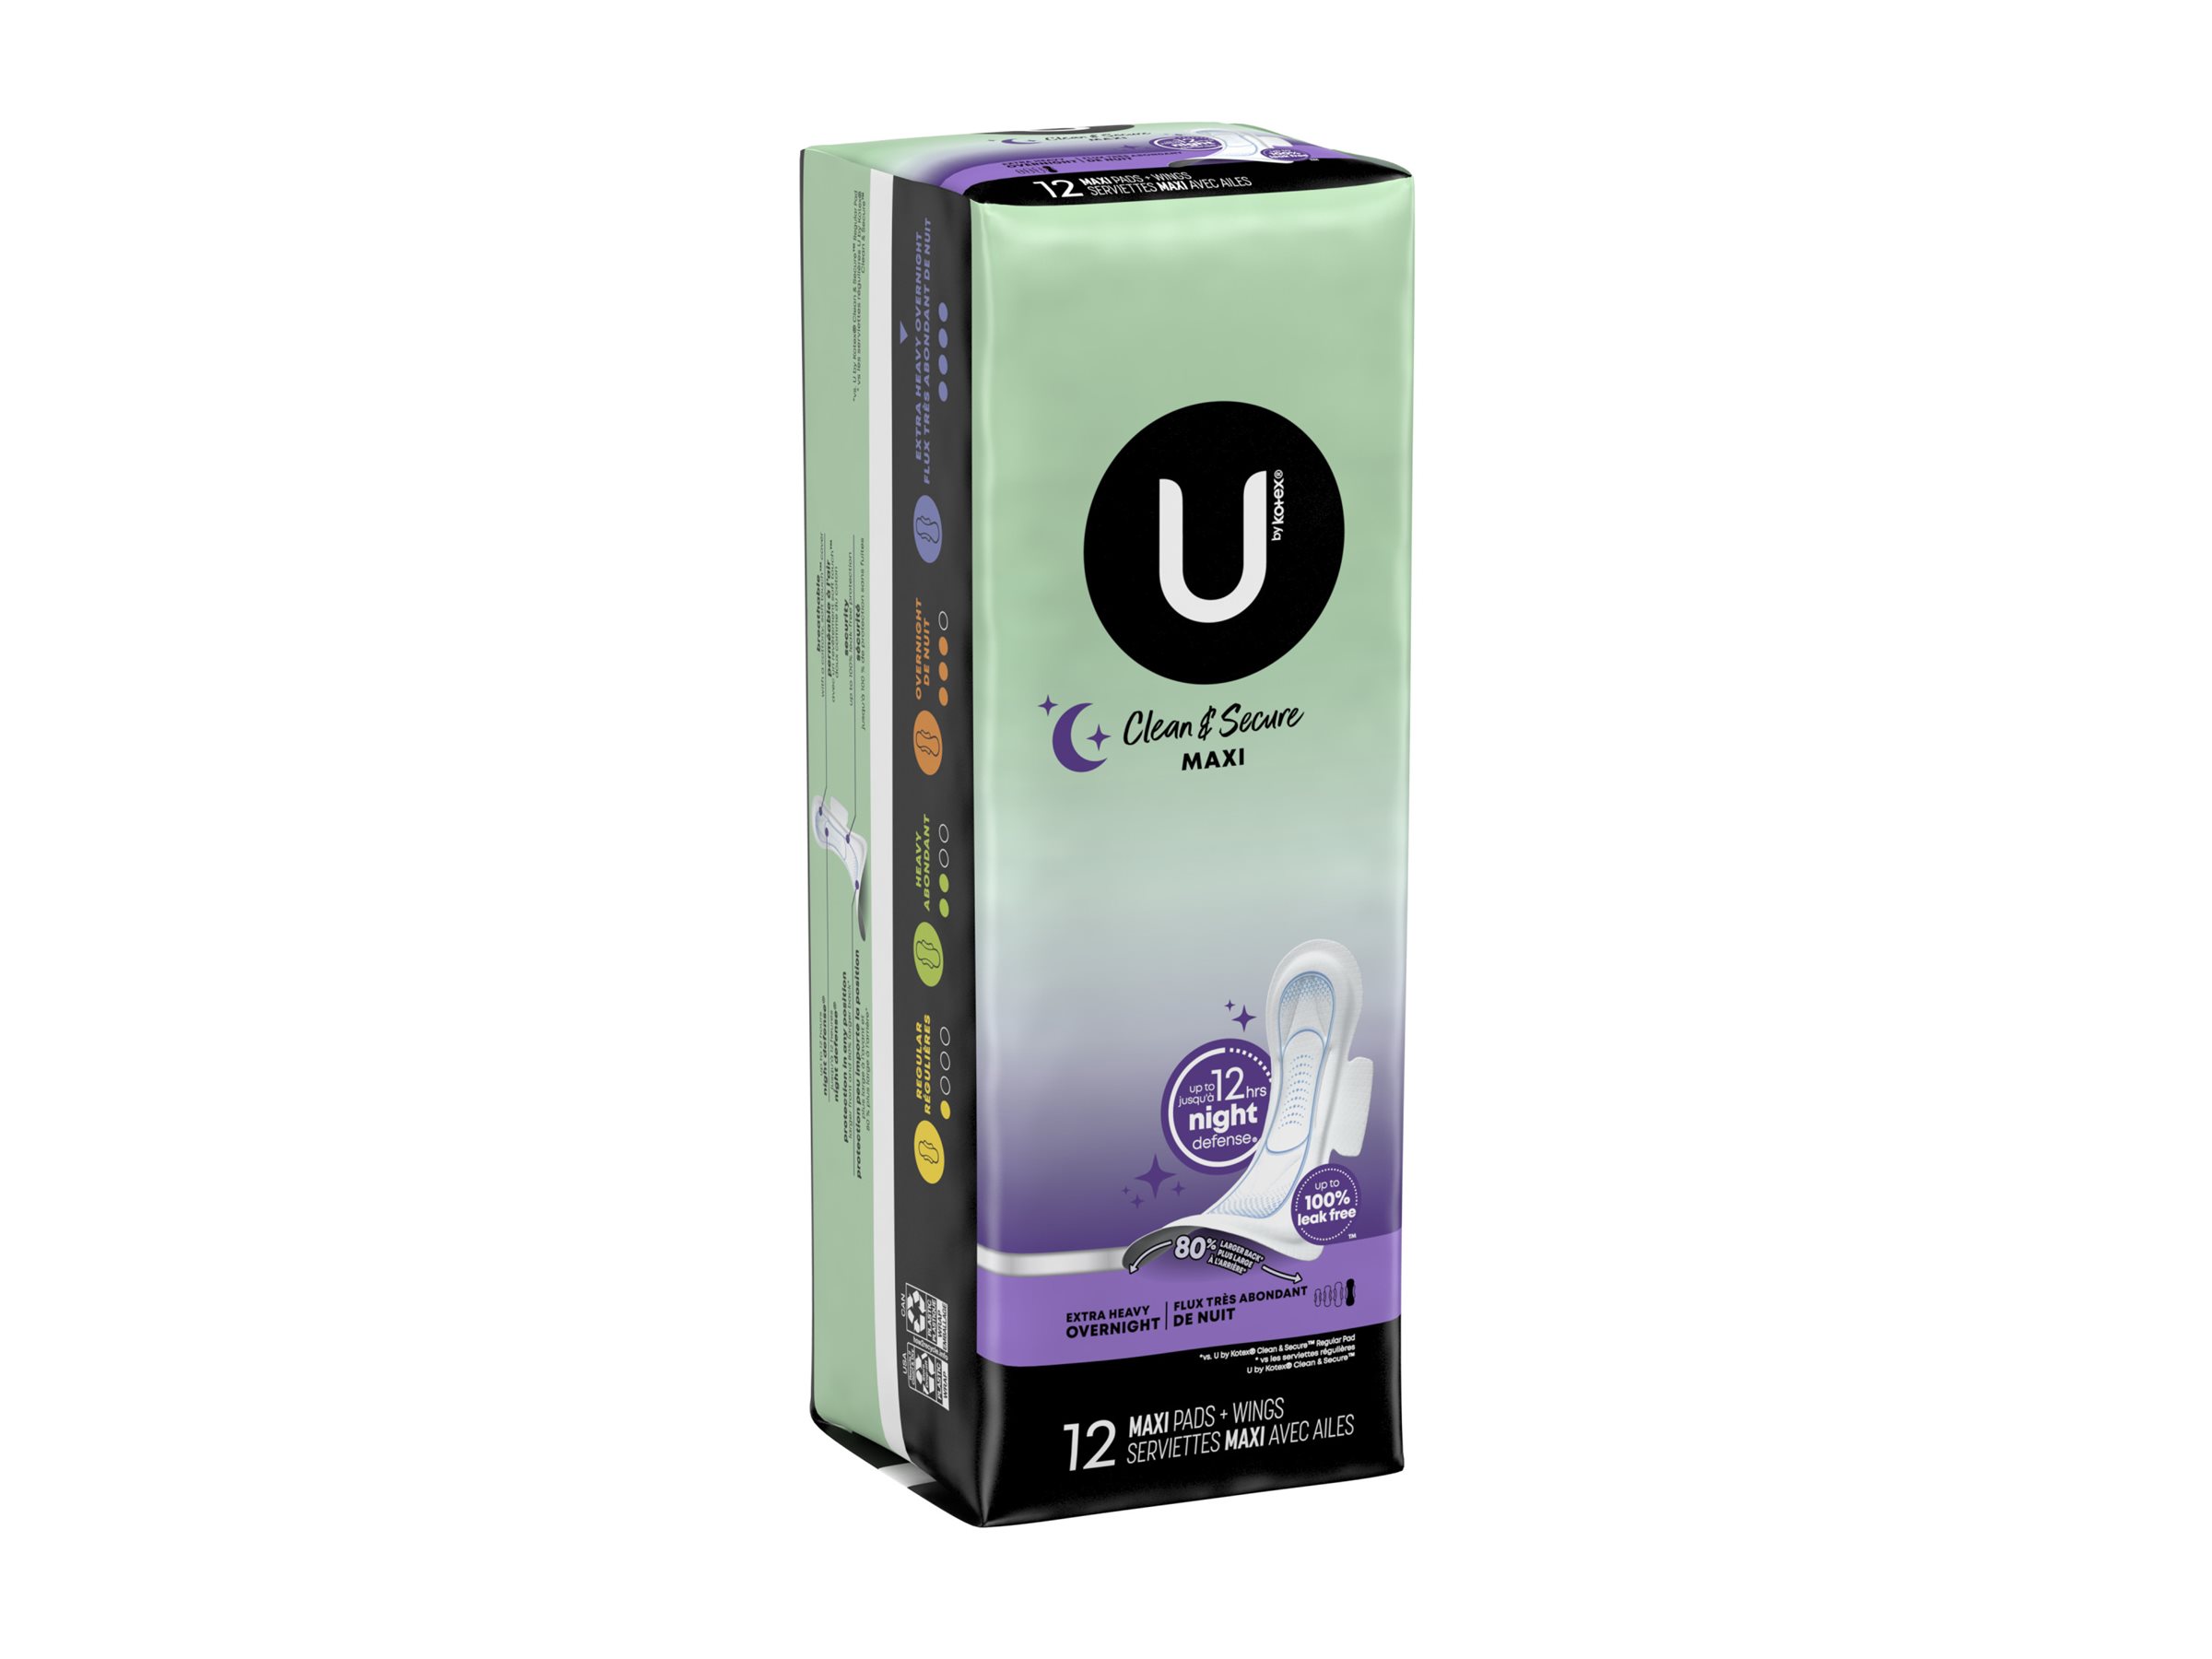 U by Kotex Clean & Secure Overnight Maxi Pads Overnight Absorbency